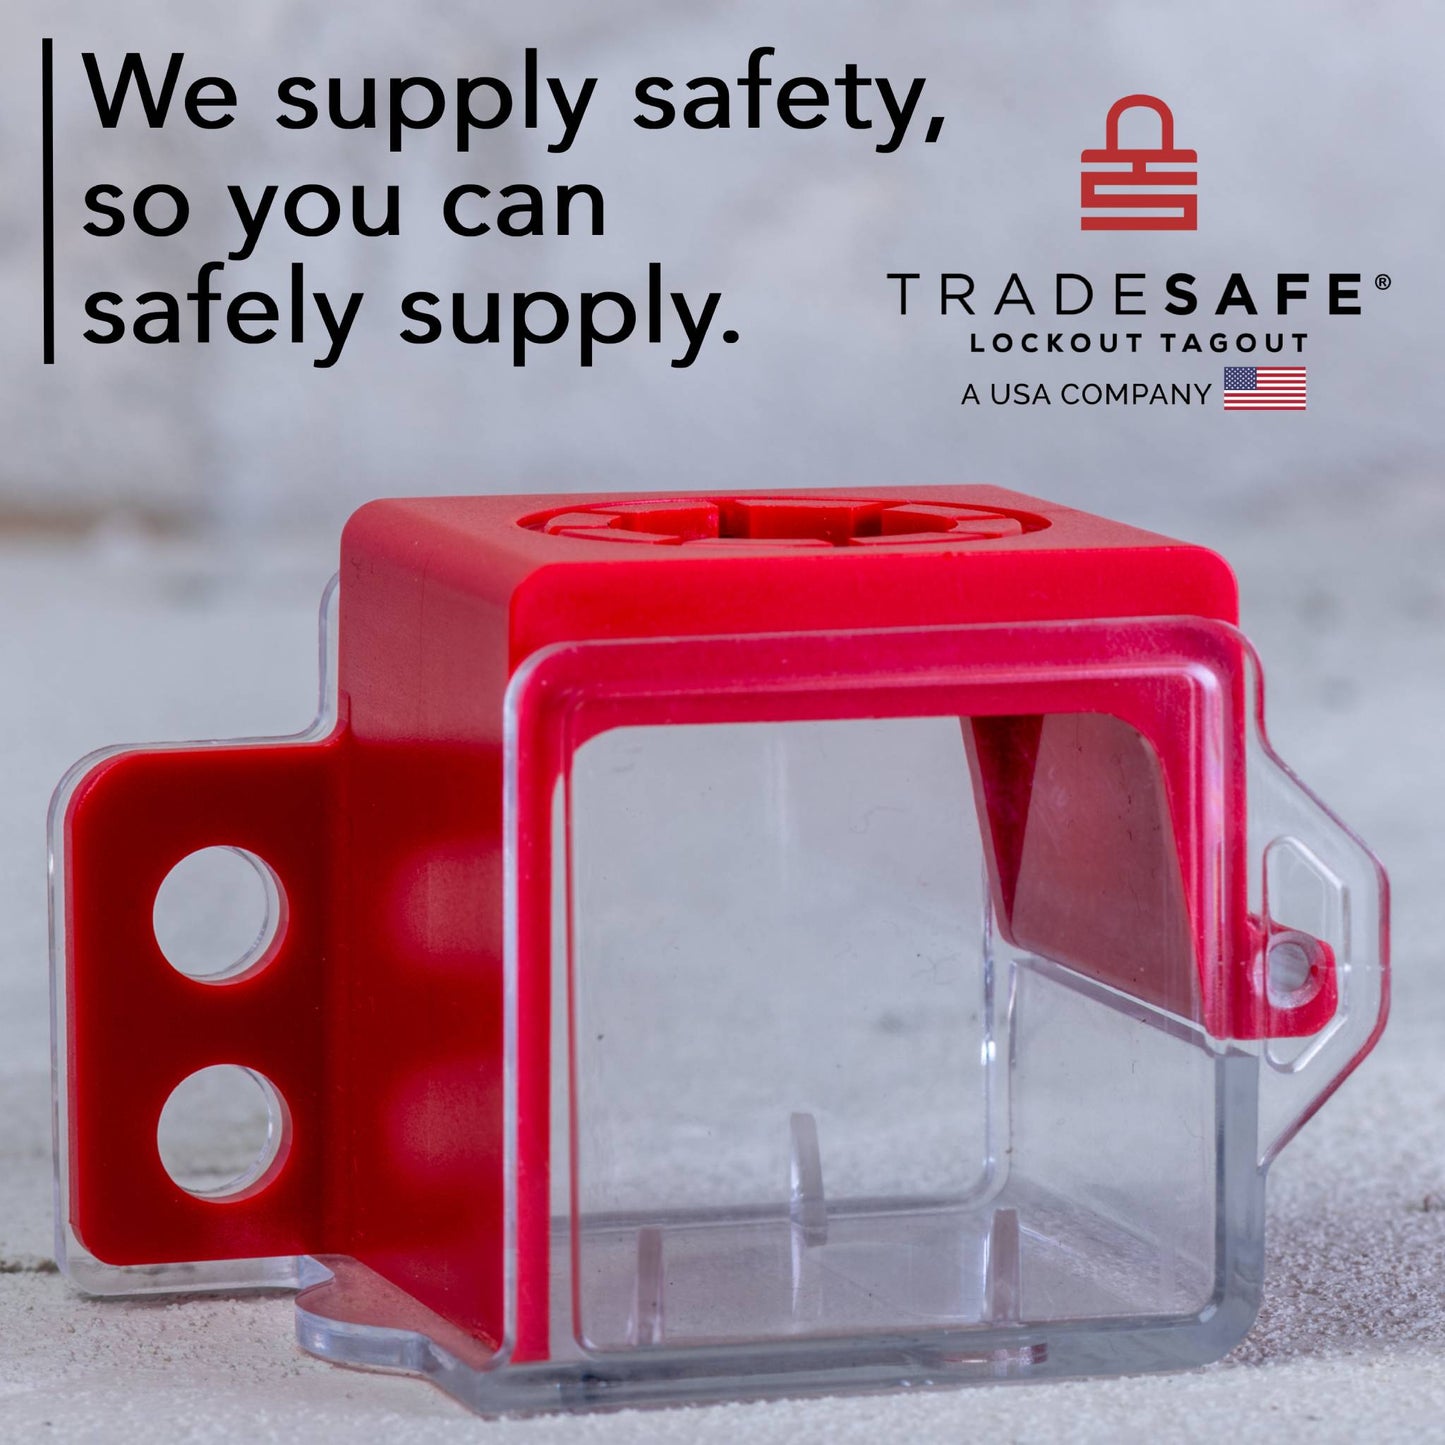 lockout tagout emergency stop button cover brand image; we supply safety, so you can safely supply